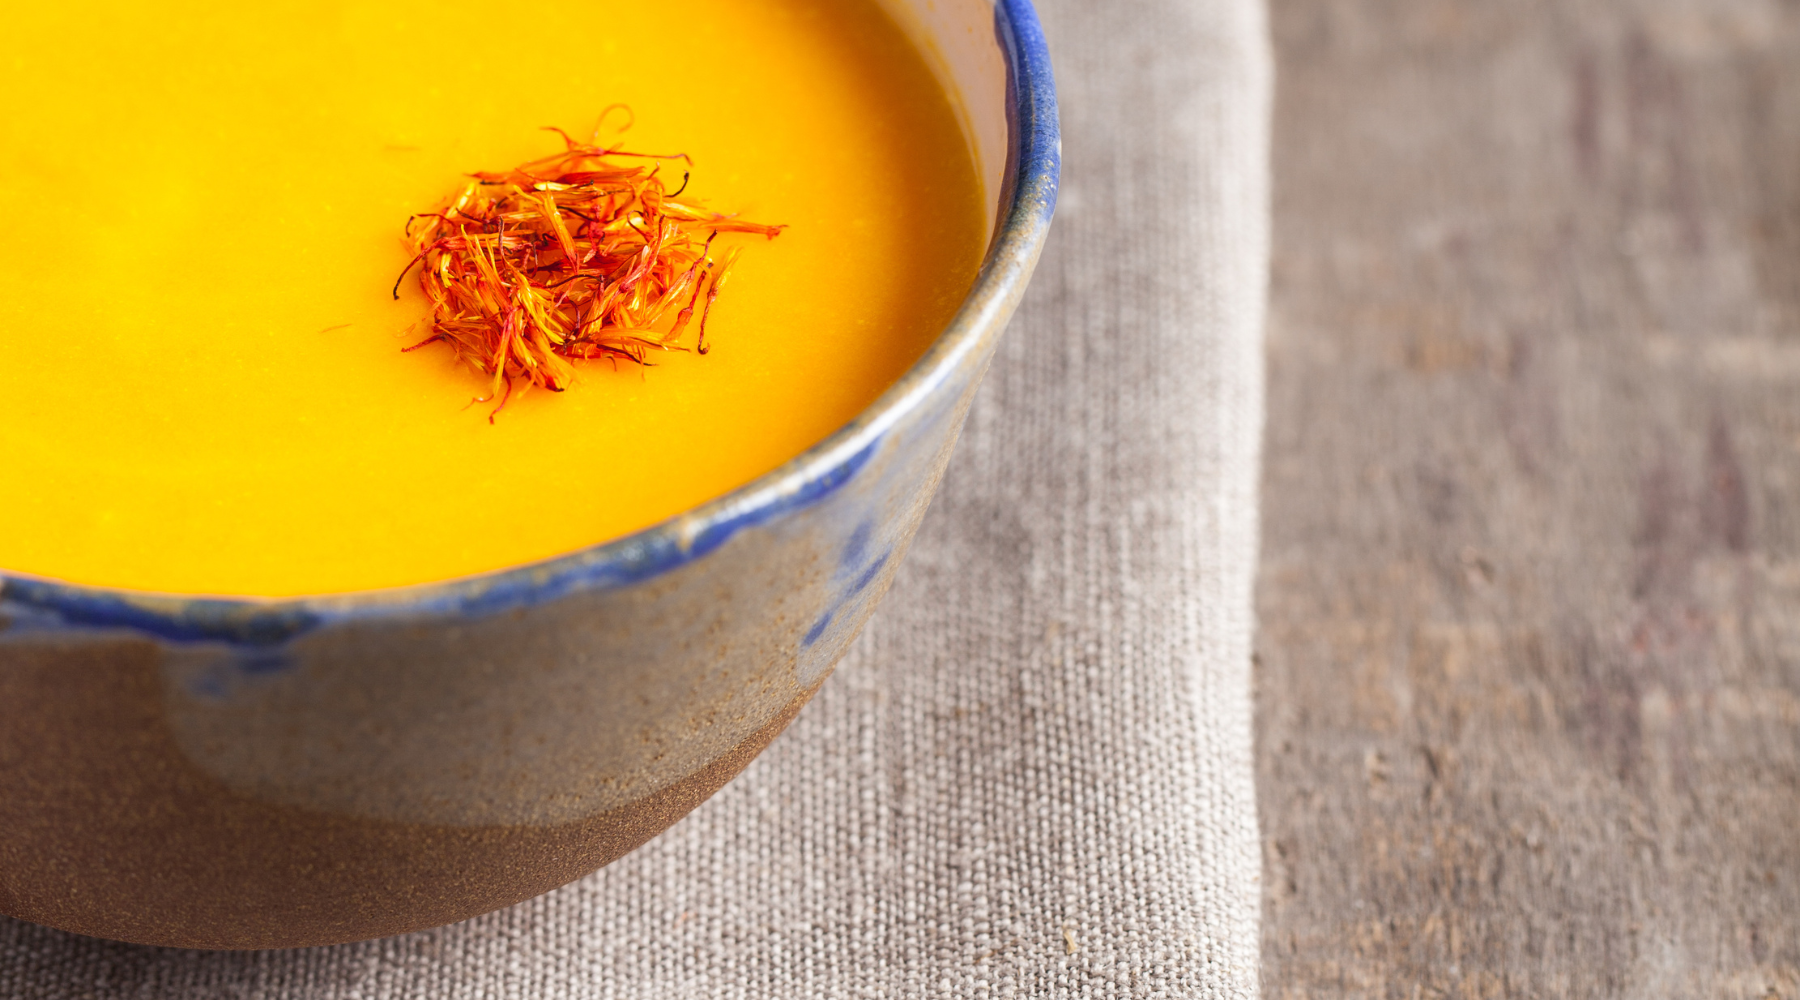 A bowl of pumpkin saffron soup garnished with a sprig of saffron, creating a vibrant and flavorful dish.